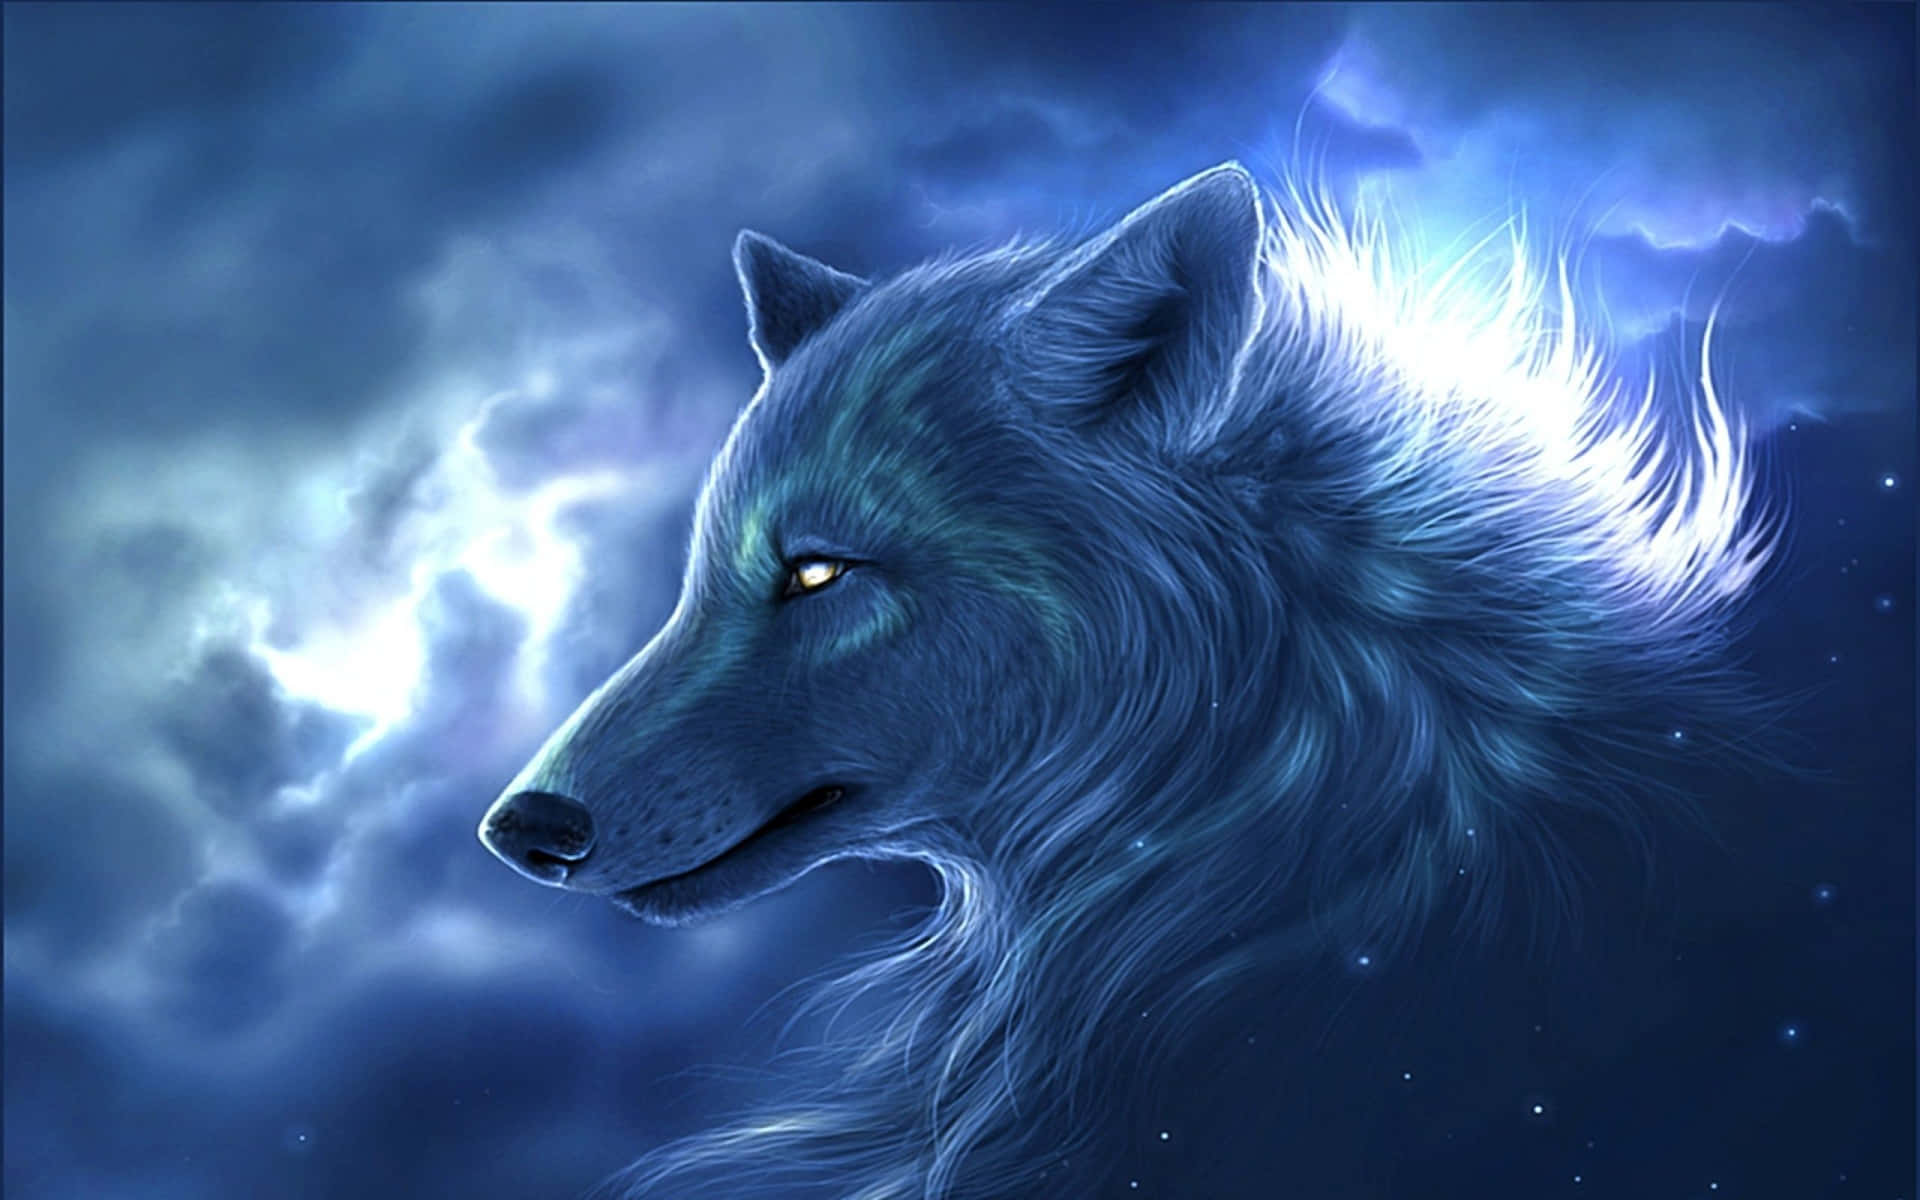 "A wolf stands between Water and Fire" Wallpaper